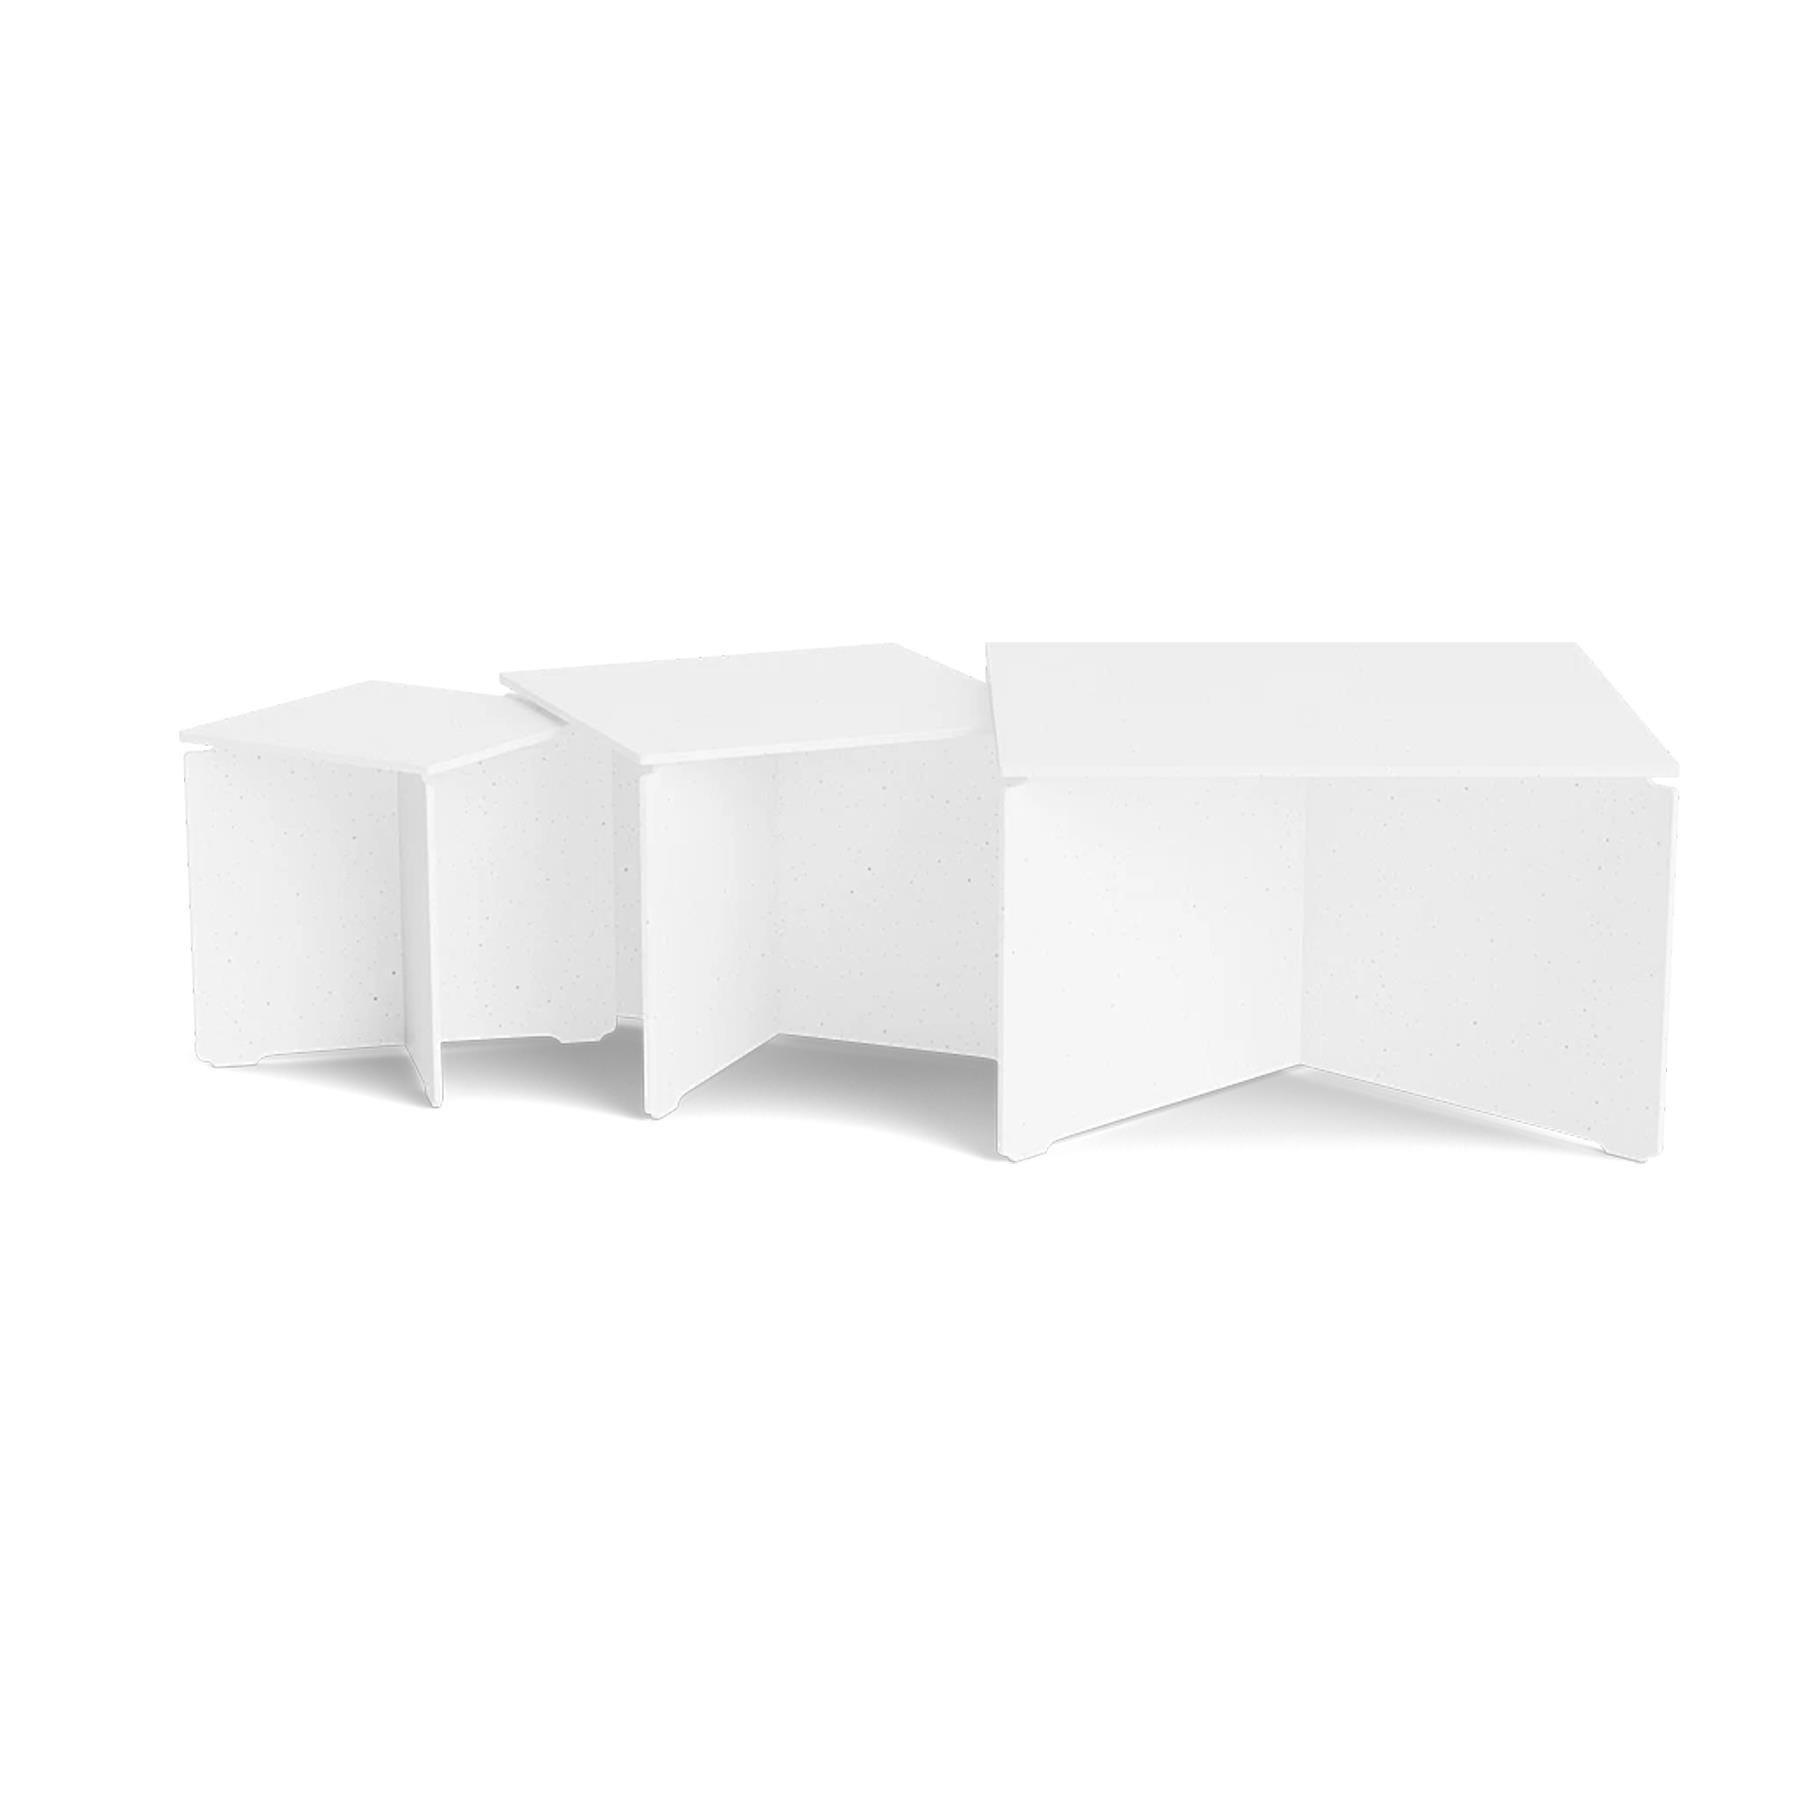 Make Nordic Crossboarder Coffee Table Really Set Of 3 White Designer Furniture From Holloways Of Ludlow